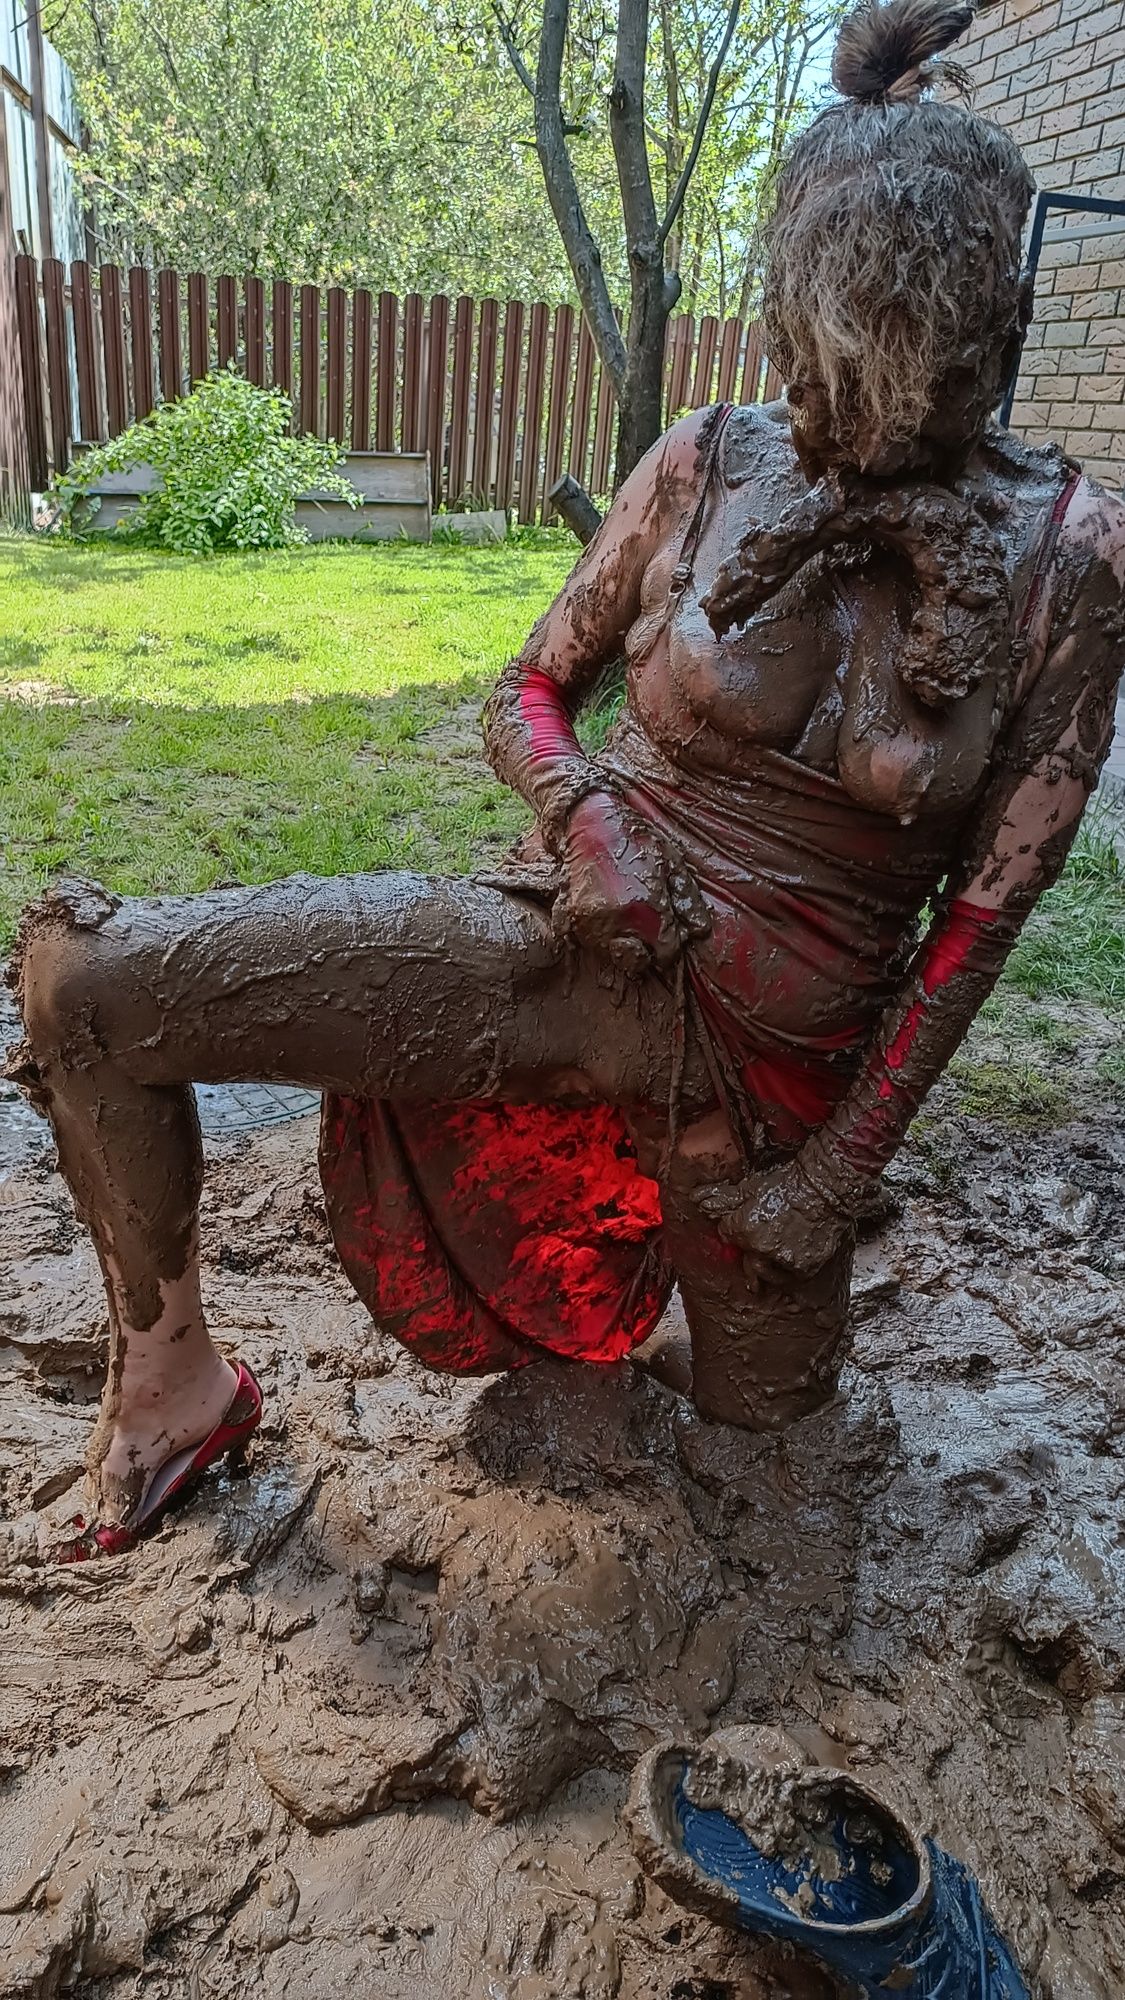 Glamour lady in mud #31